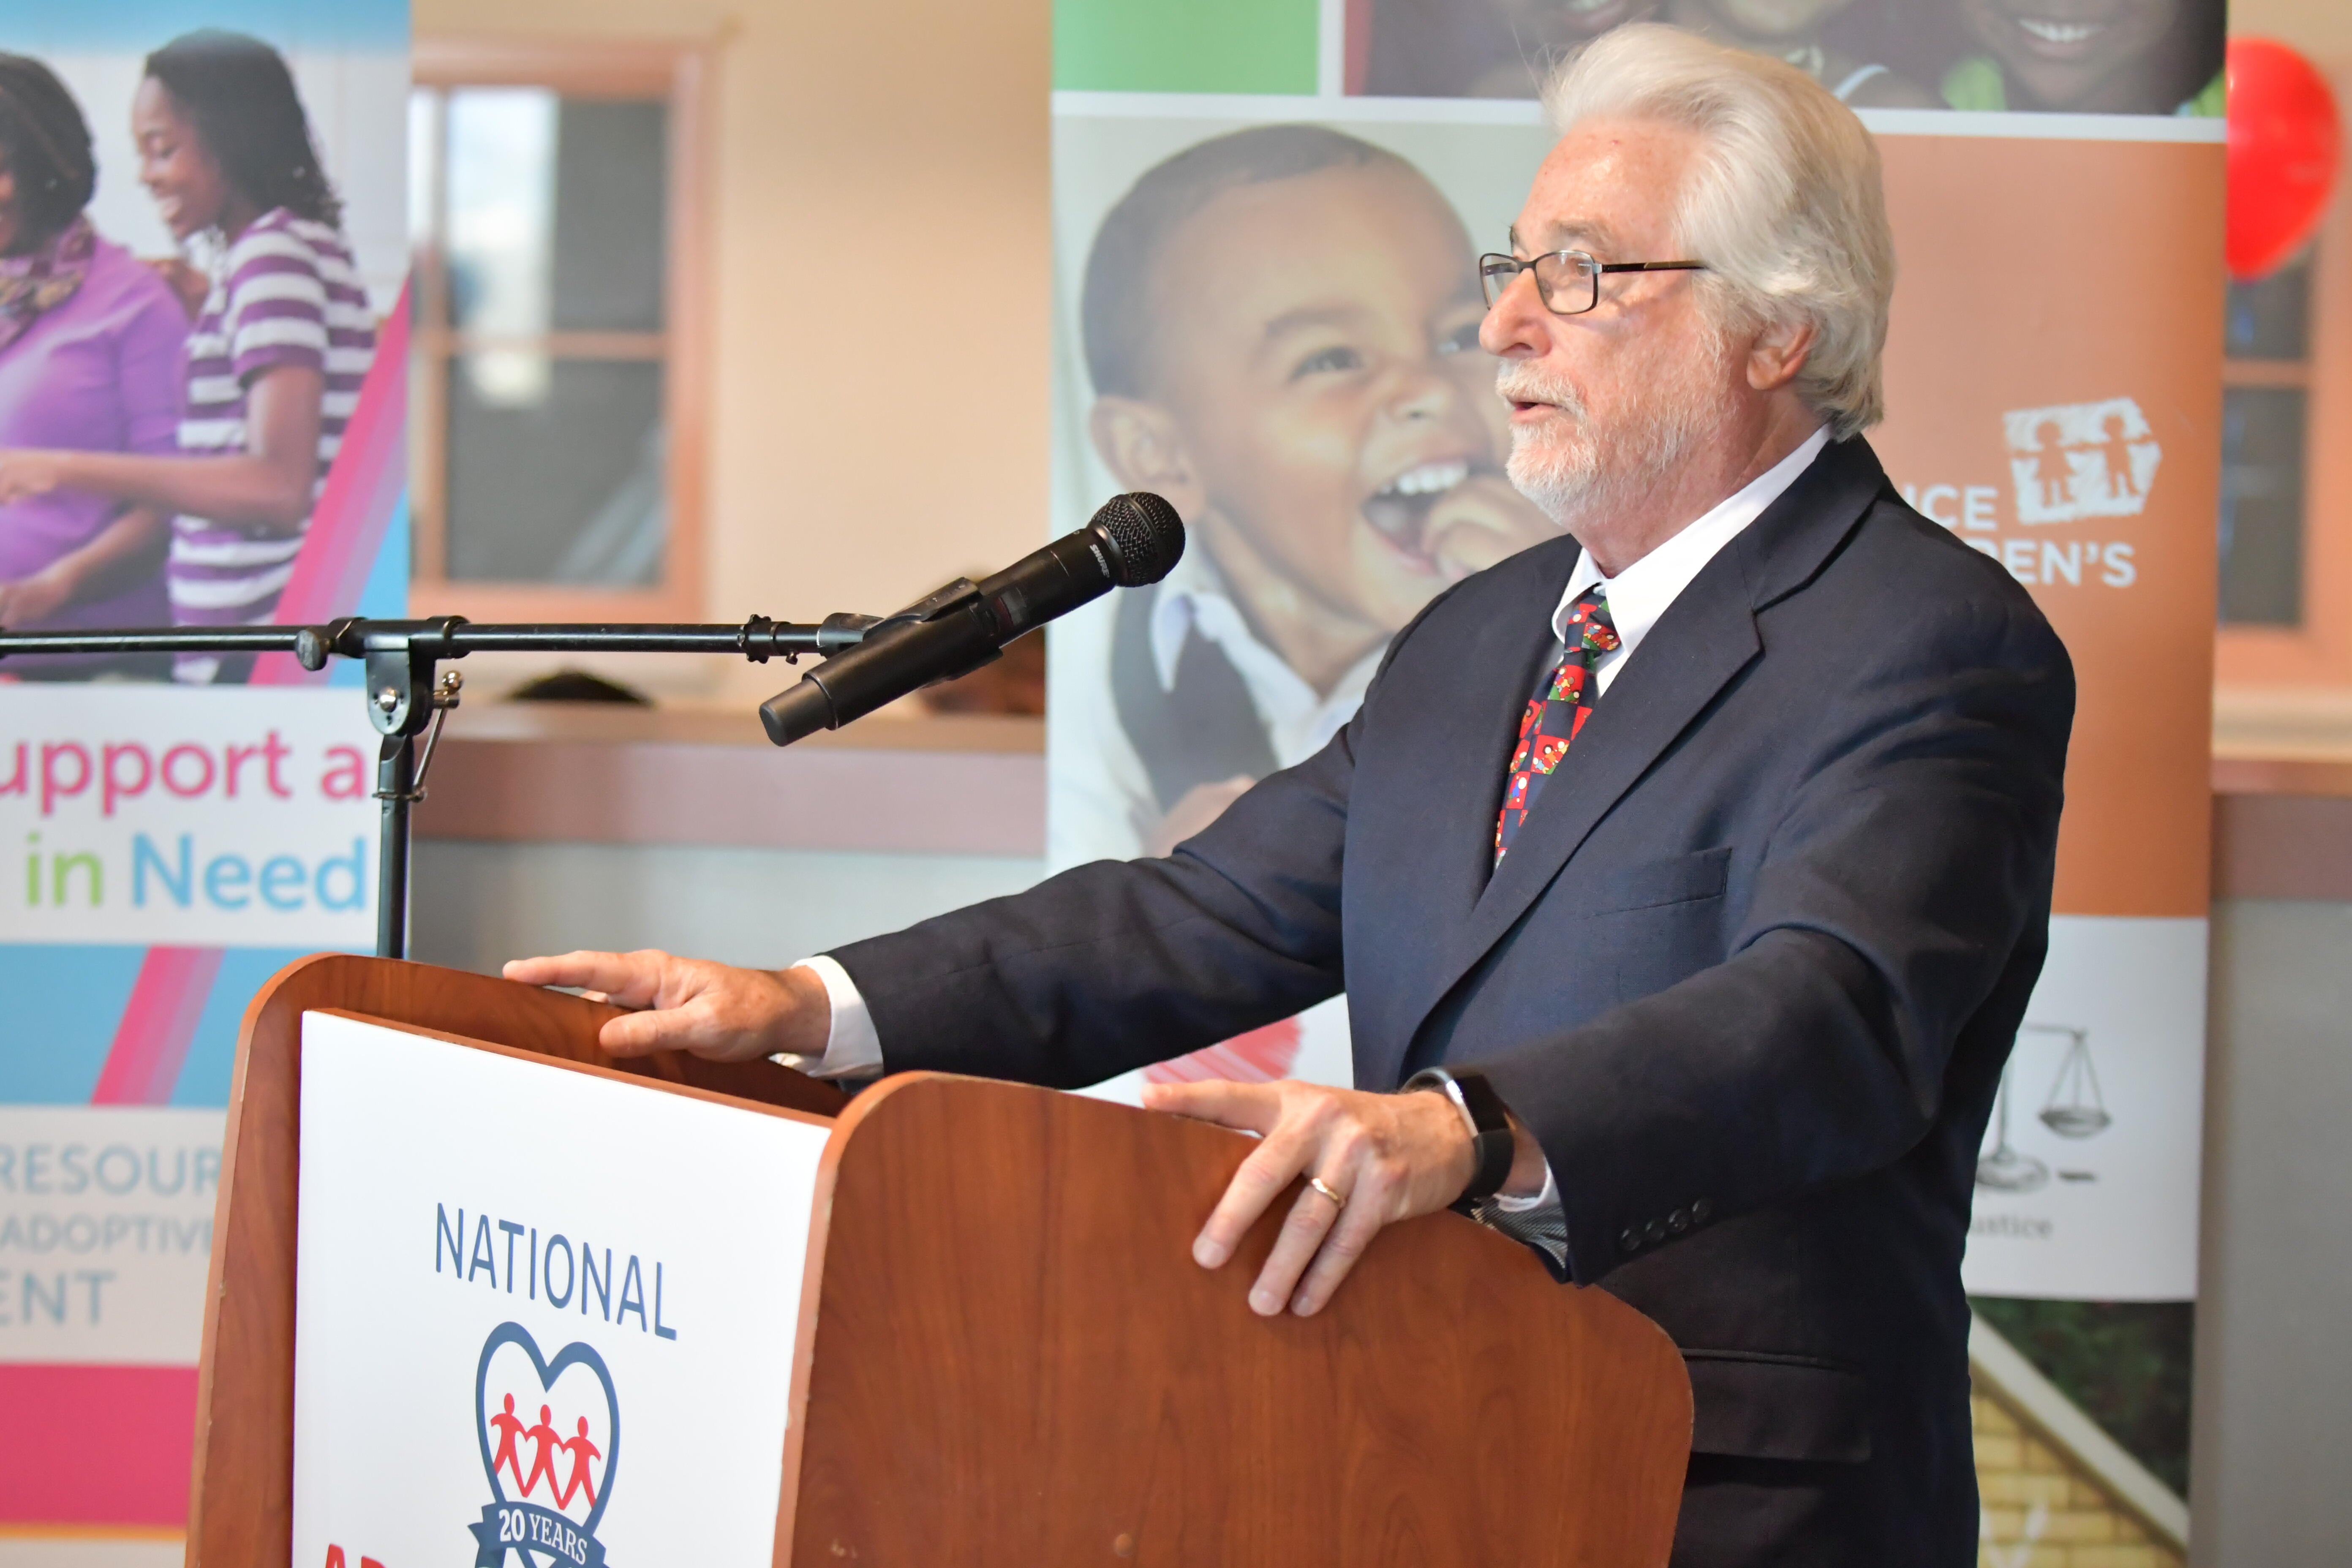 Los Angeles County Adoption Day welcomed special guest Judge Michael Nash (Ret.) who is credited with getting the national event started in 1998.